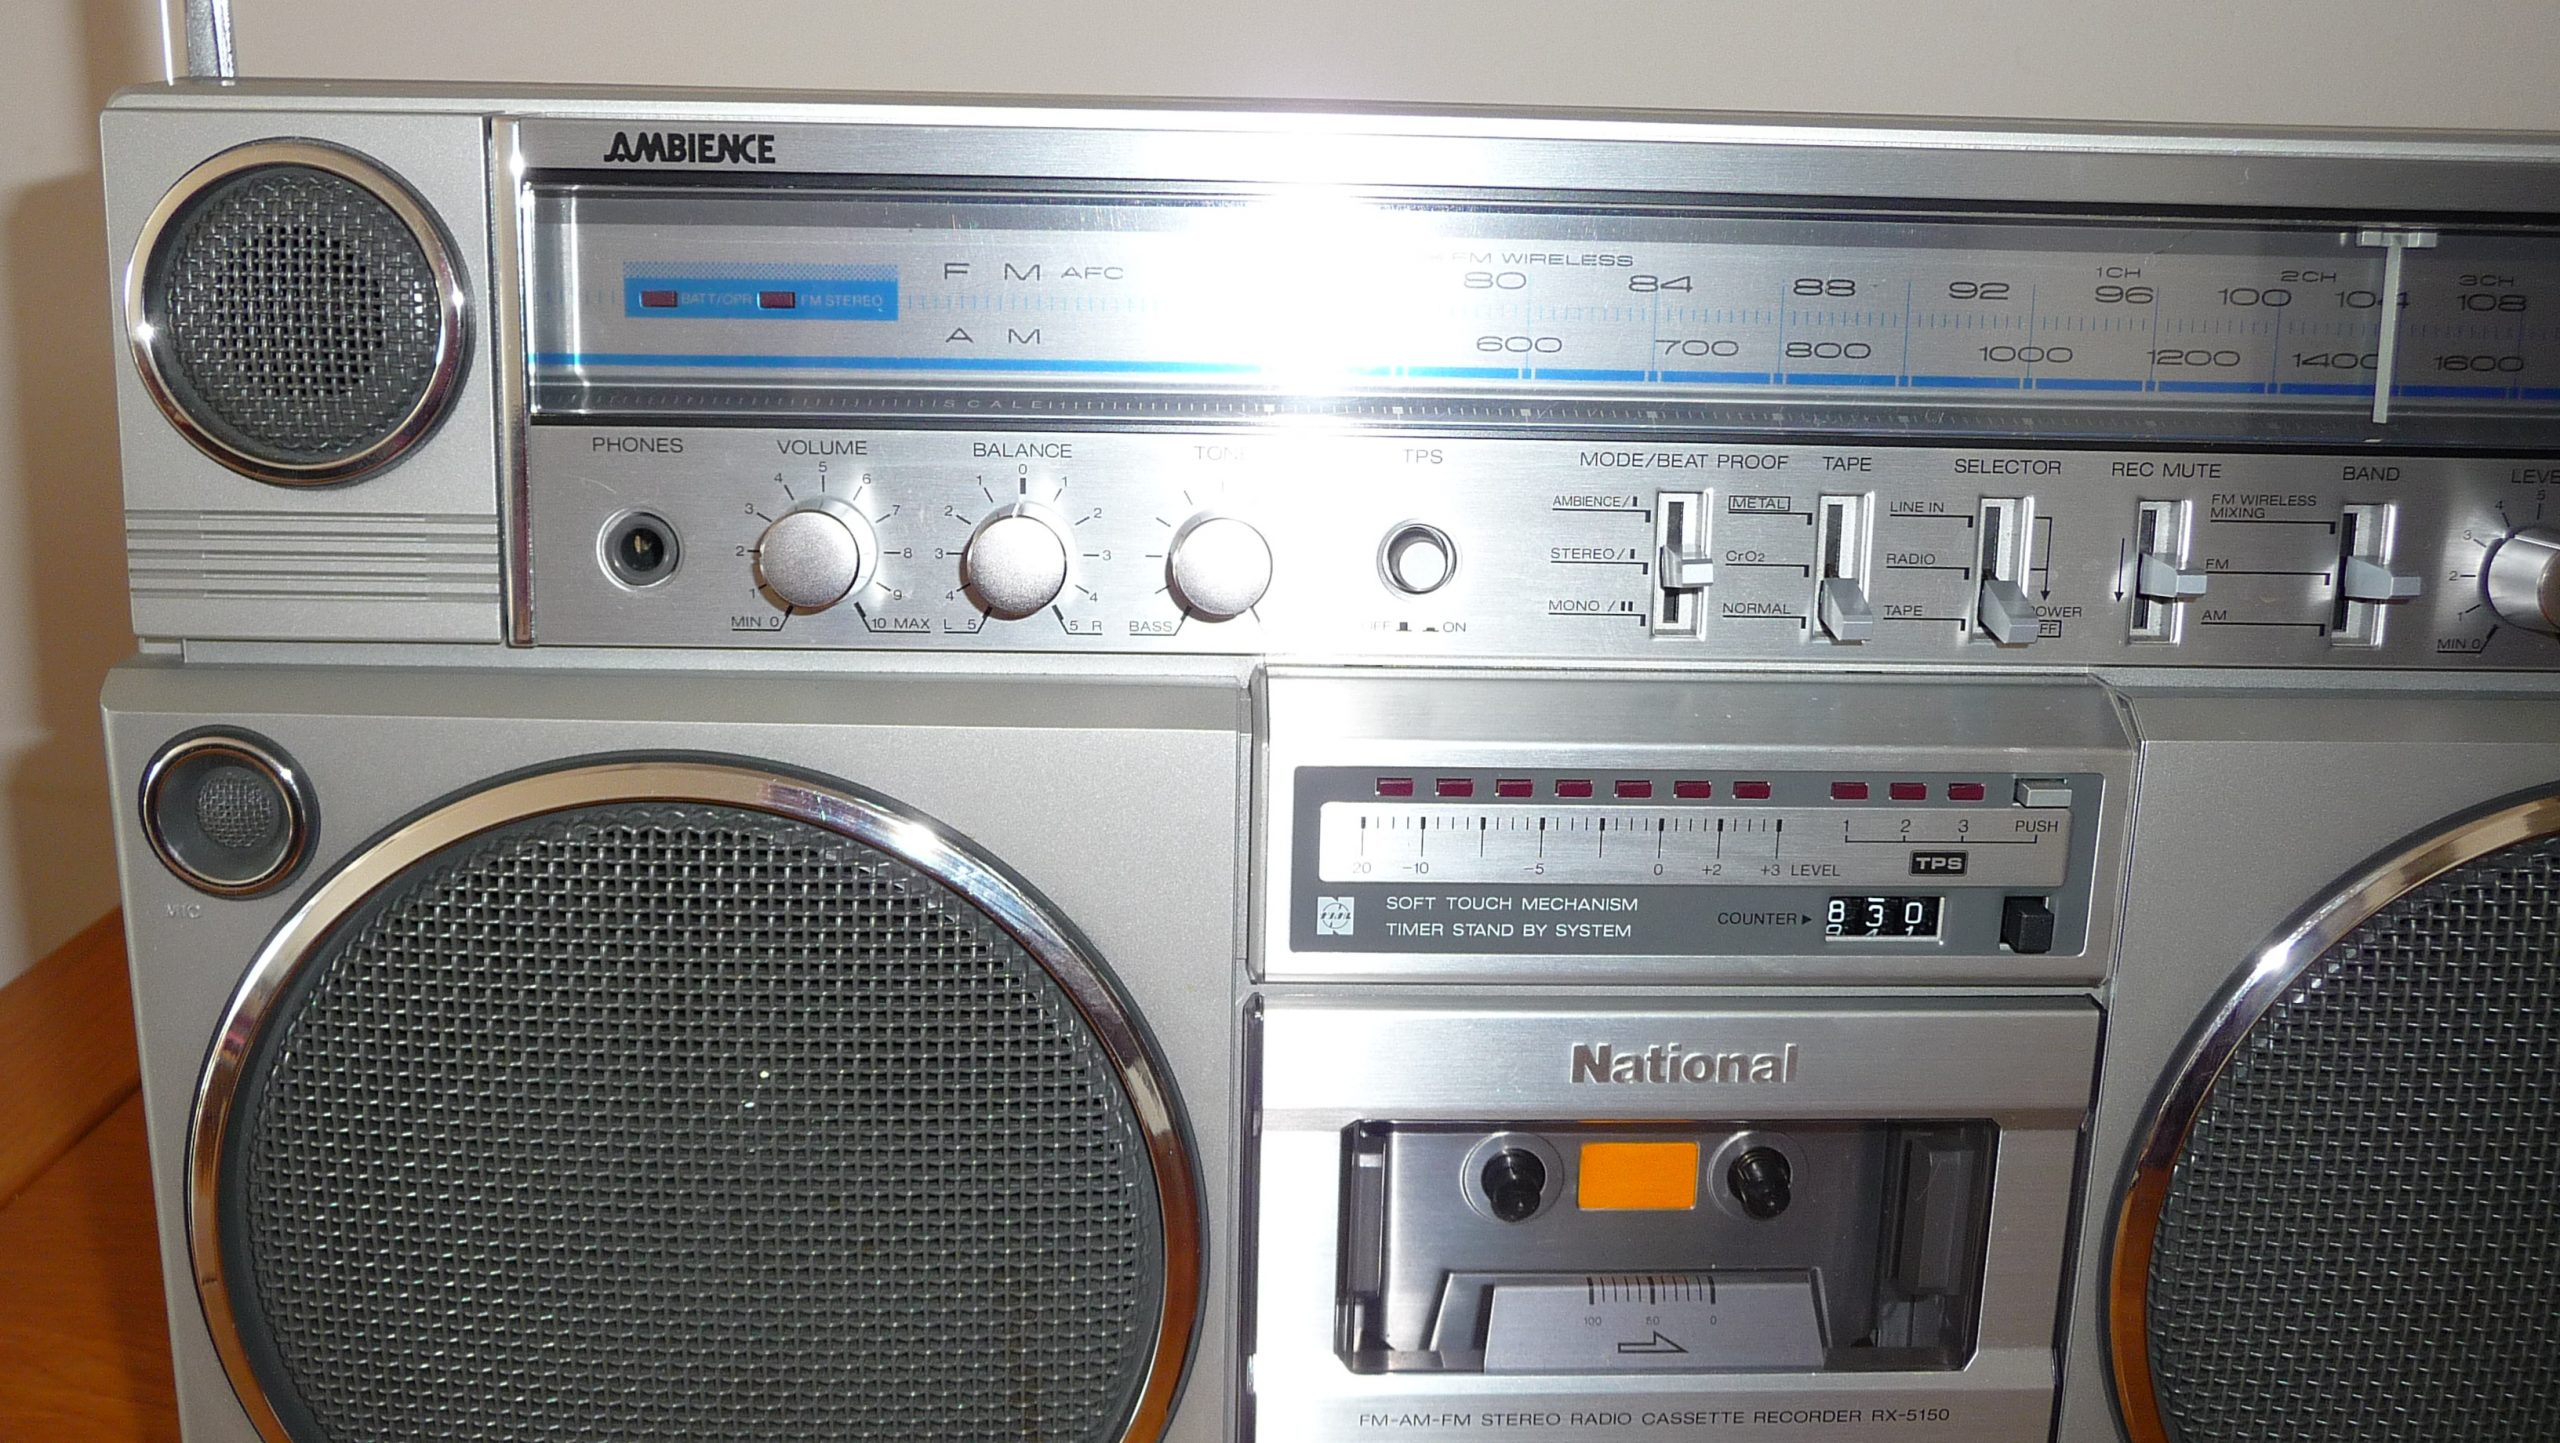 NATIONAL RX-5150 Radio Cassette Boombox - Old Boomboxes